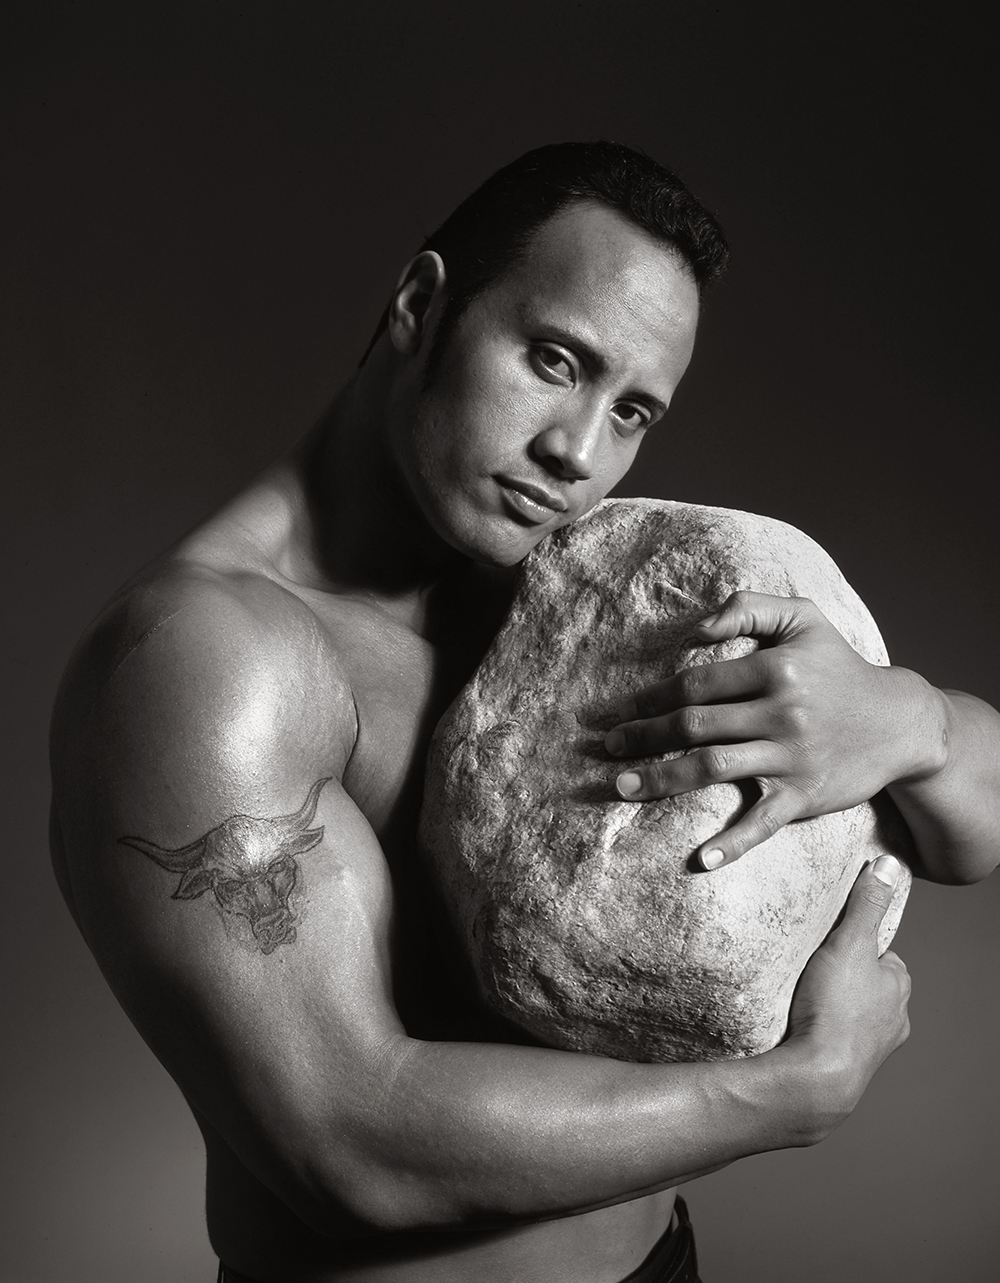 The Rock, New York 1999. (Blacjk and White)  Photographed by George Holz